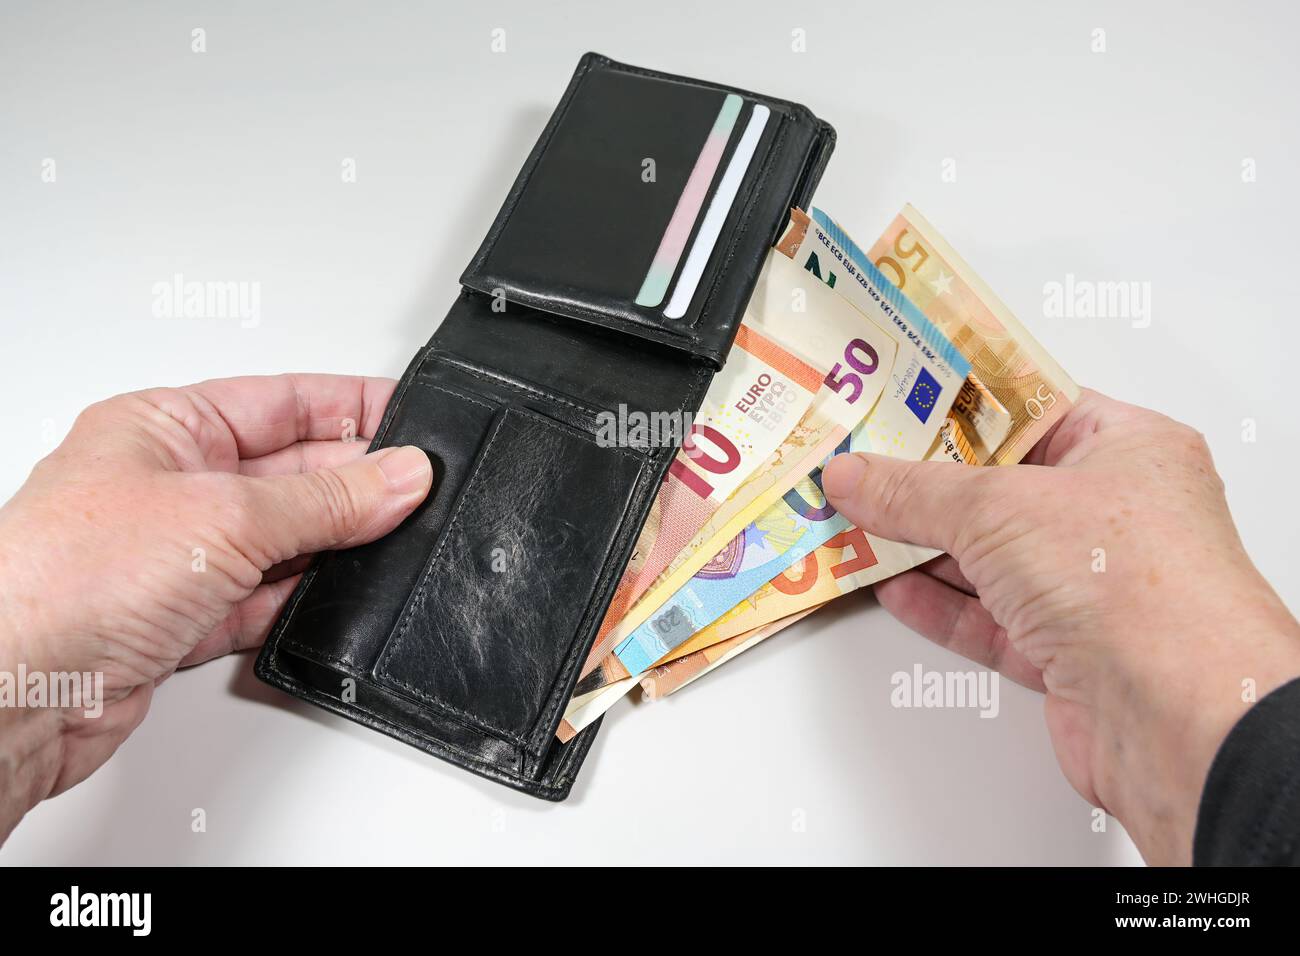 Hands taking various euro banknotes out of a black leather wallet, money and finance concept, light gray background Stock Photo